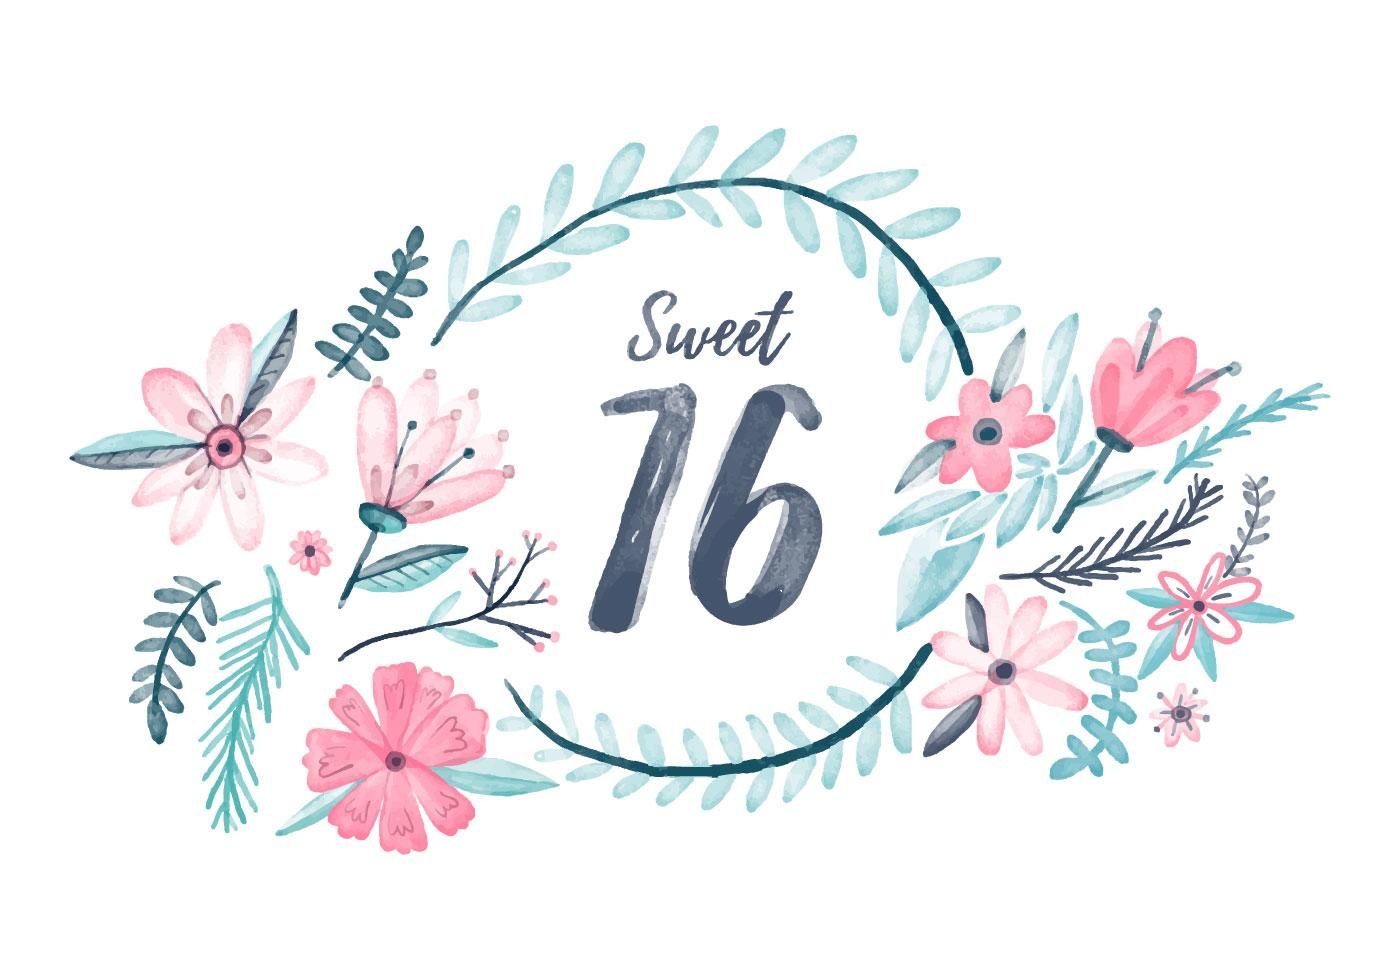 Sweet watercolor background watercolor background sweet birthday background wallpaper